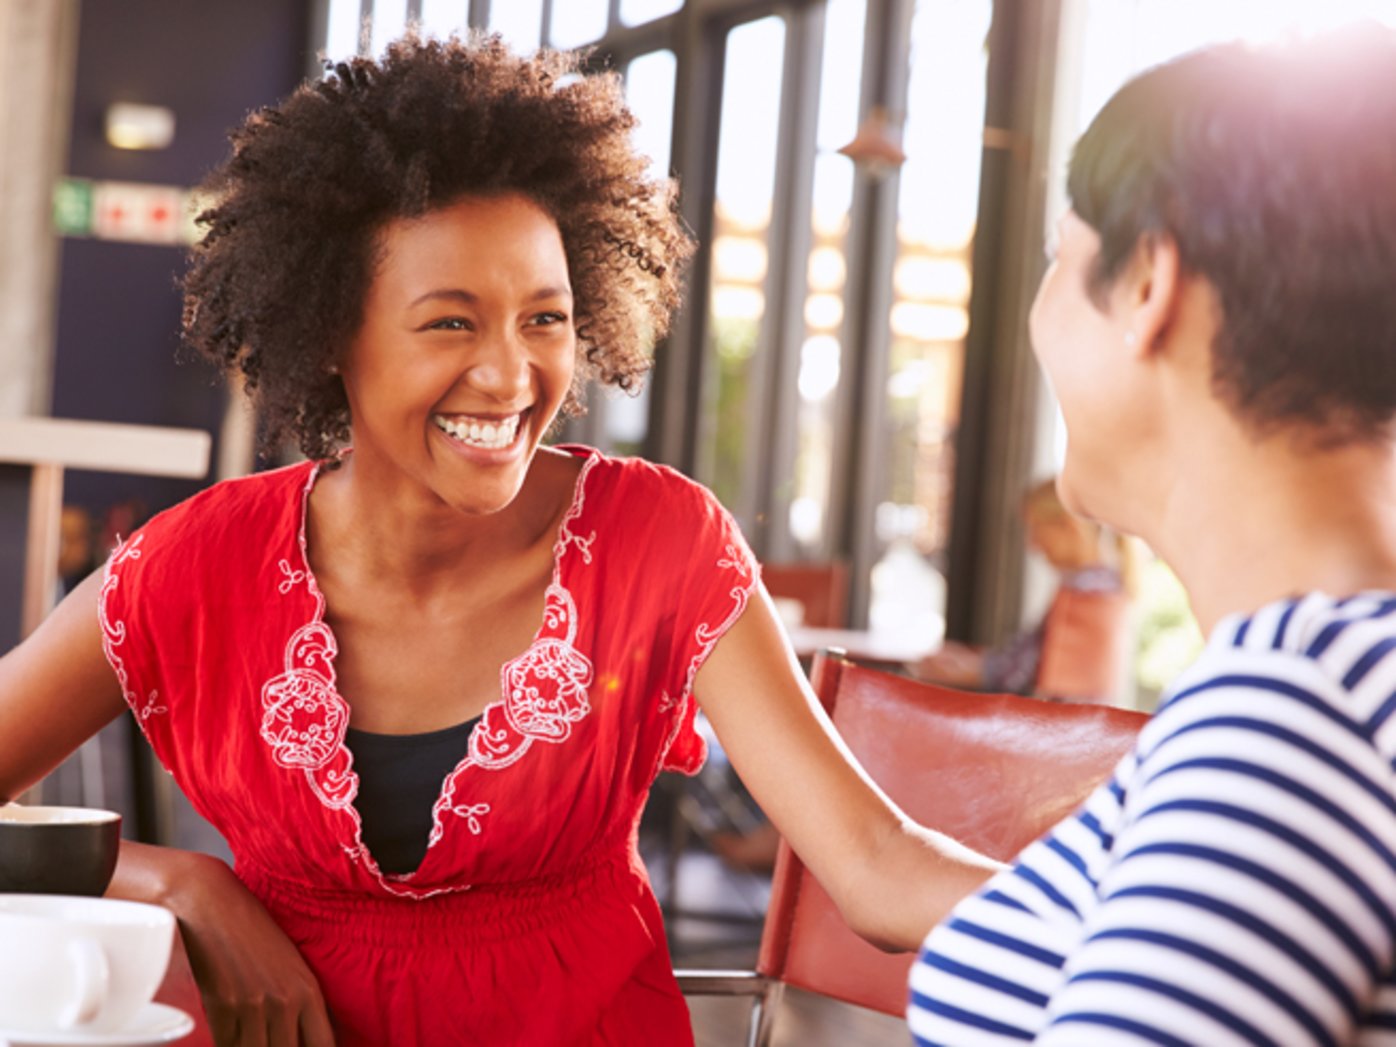 Female friendships: good for health and happiness